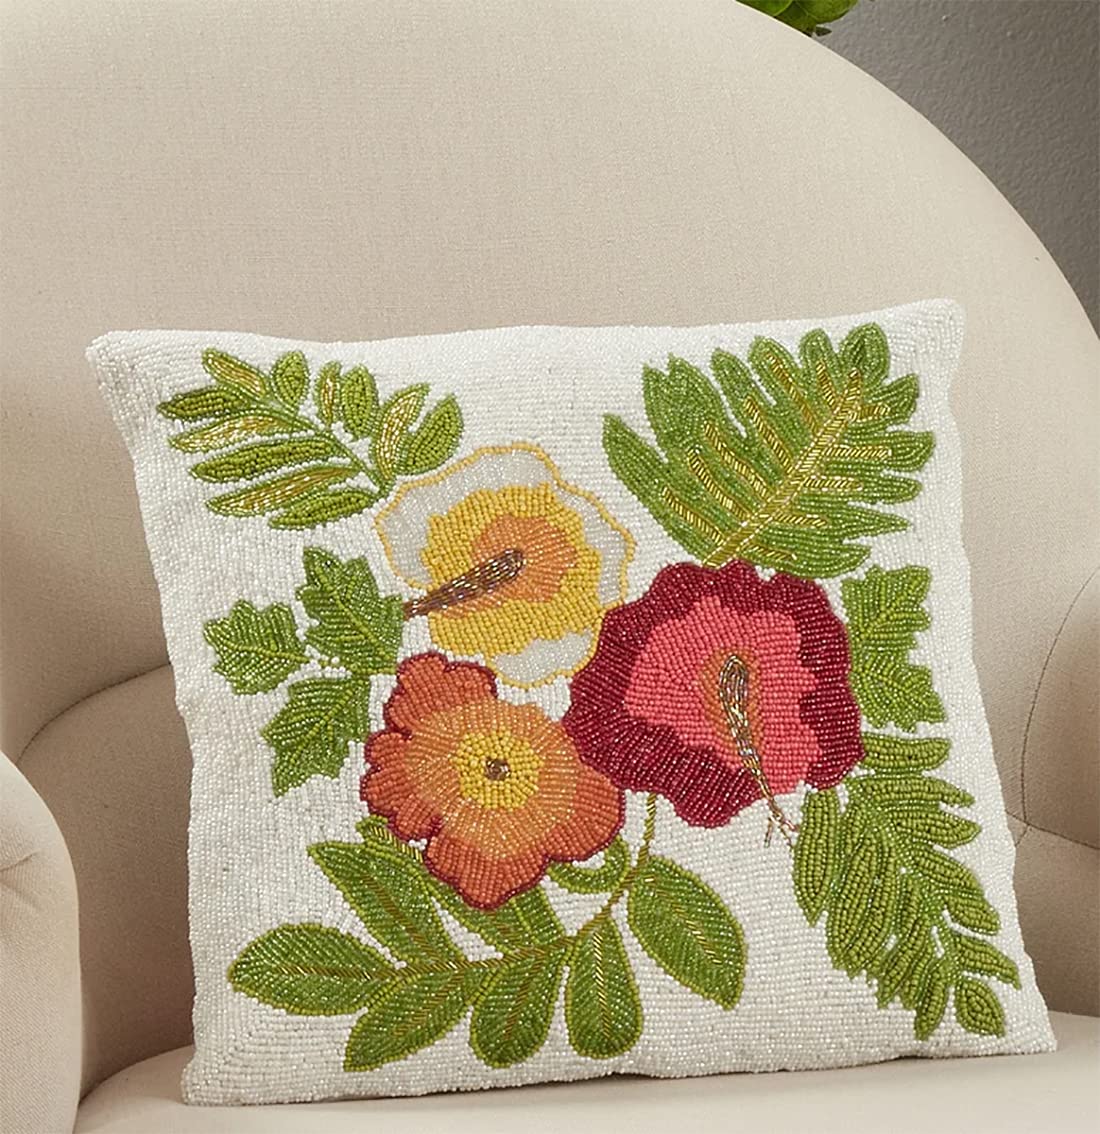 Fennco Styles Hand Beaded Garden Flowers Cotton Throw Pillow 16" W x 16" L - Multicolored Floral Cushion for Home, Couch, Living Room, Seasonal Décor, Special Occasion